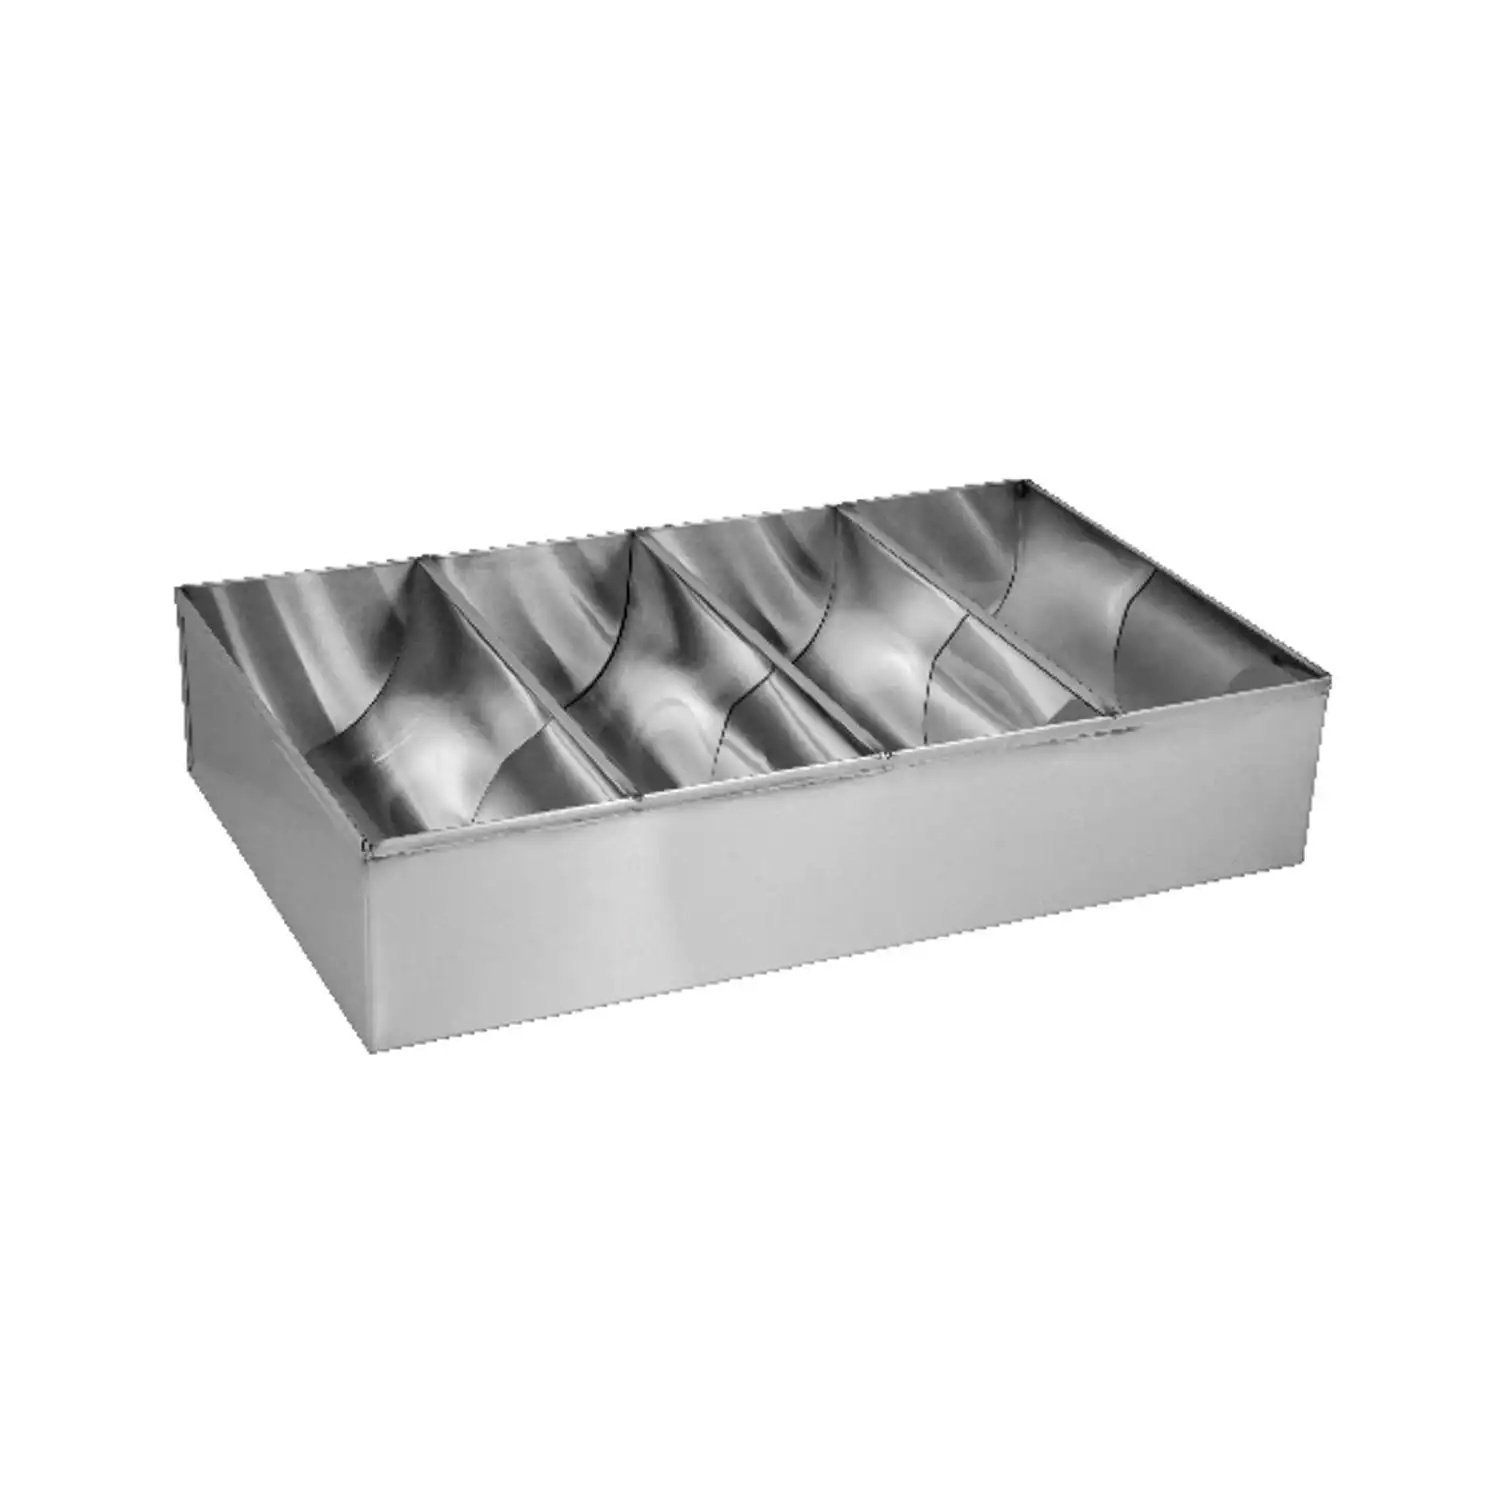 Stainless Steel Cutlery Tray   4 Compartments